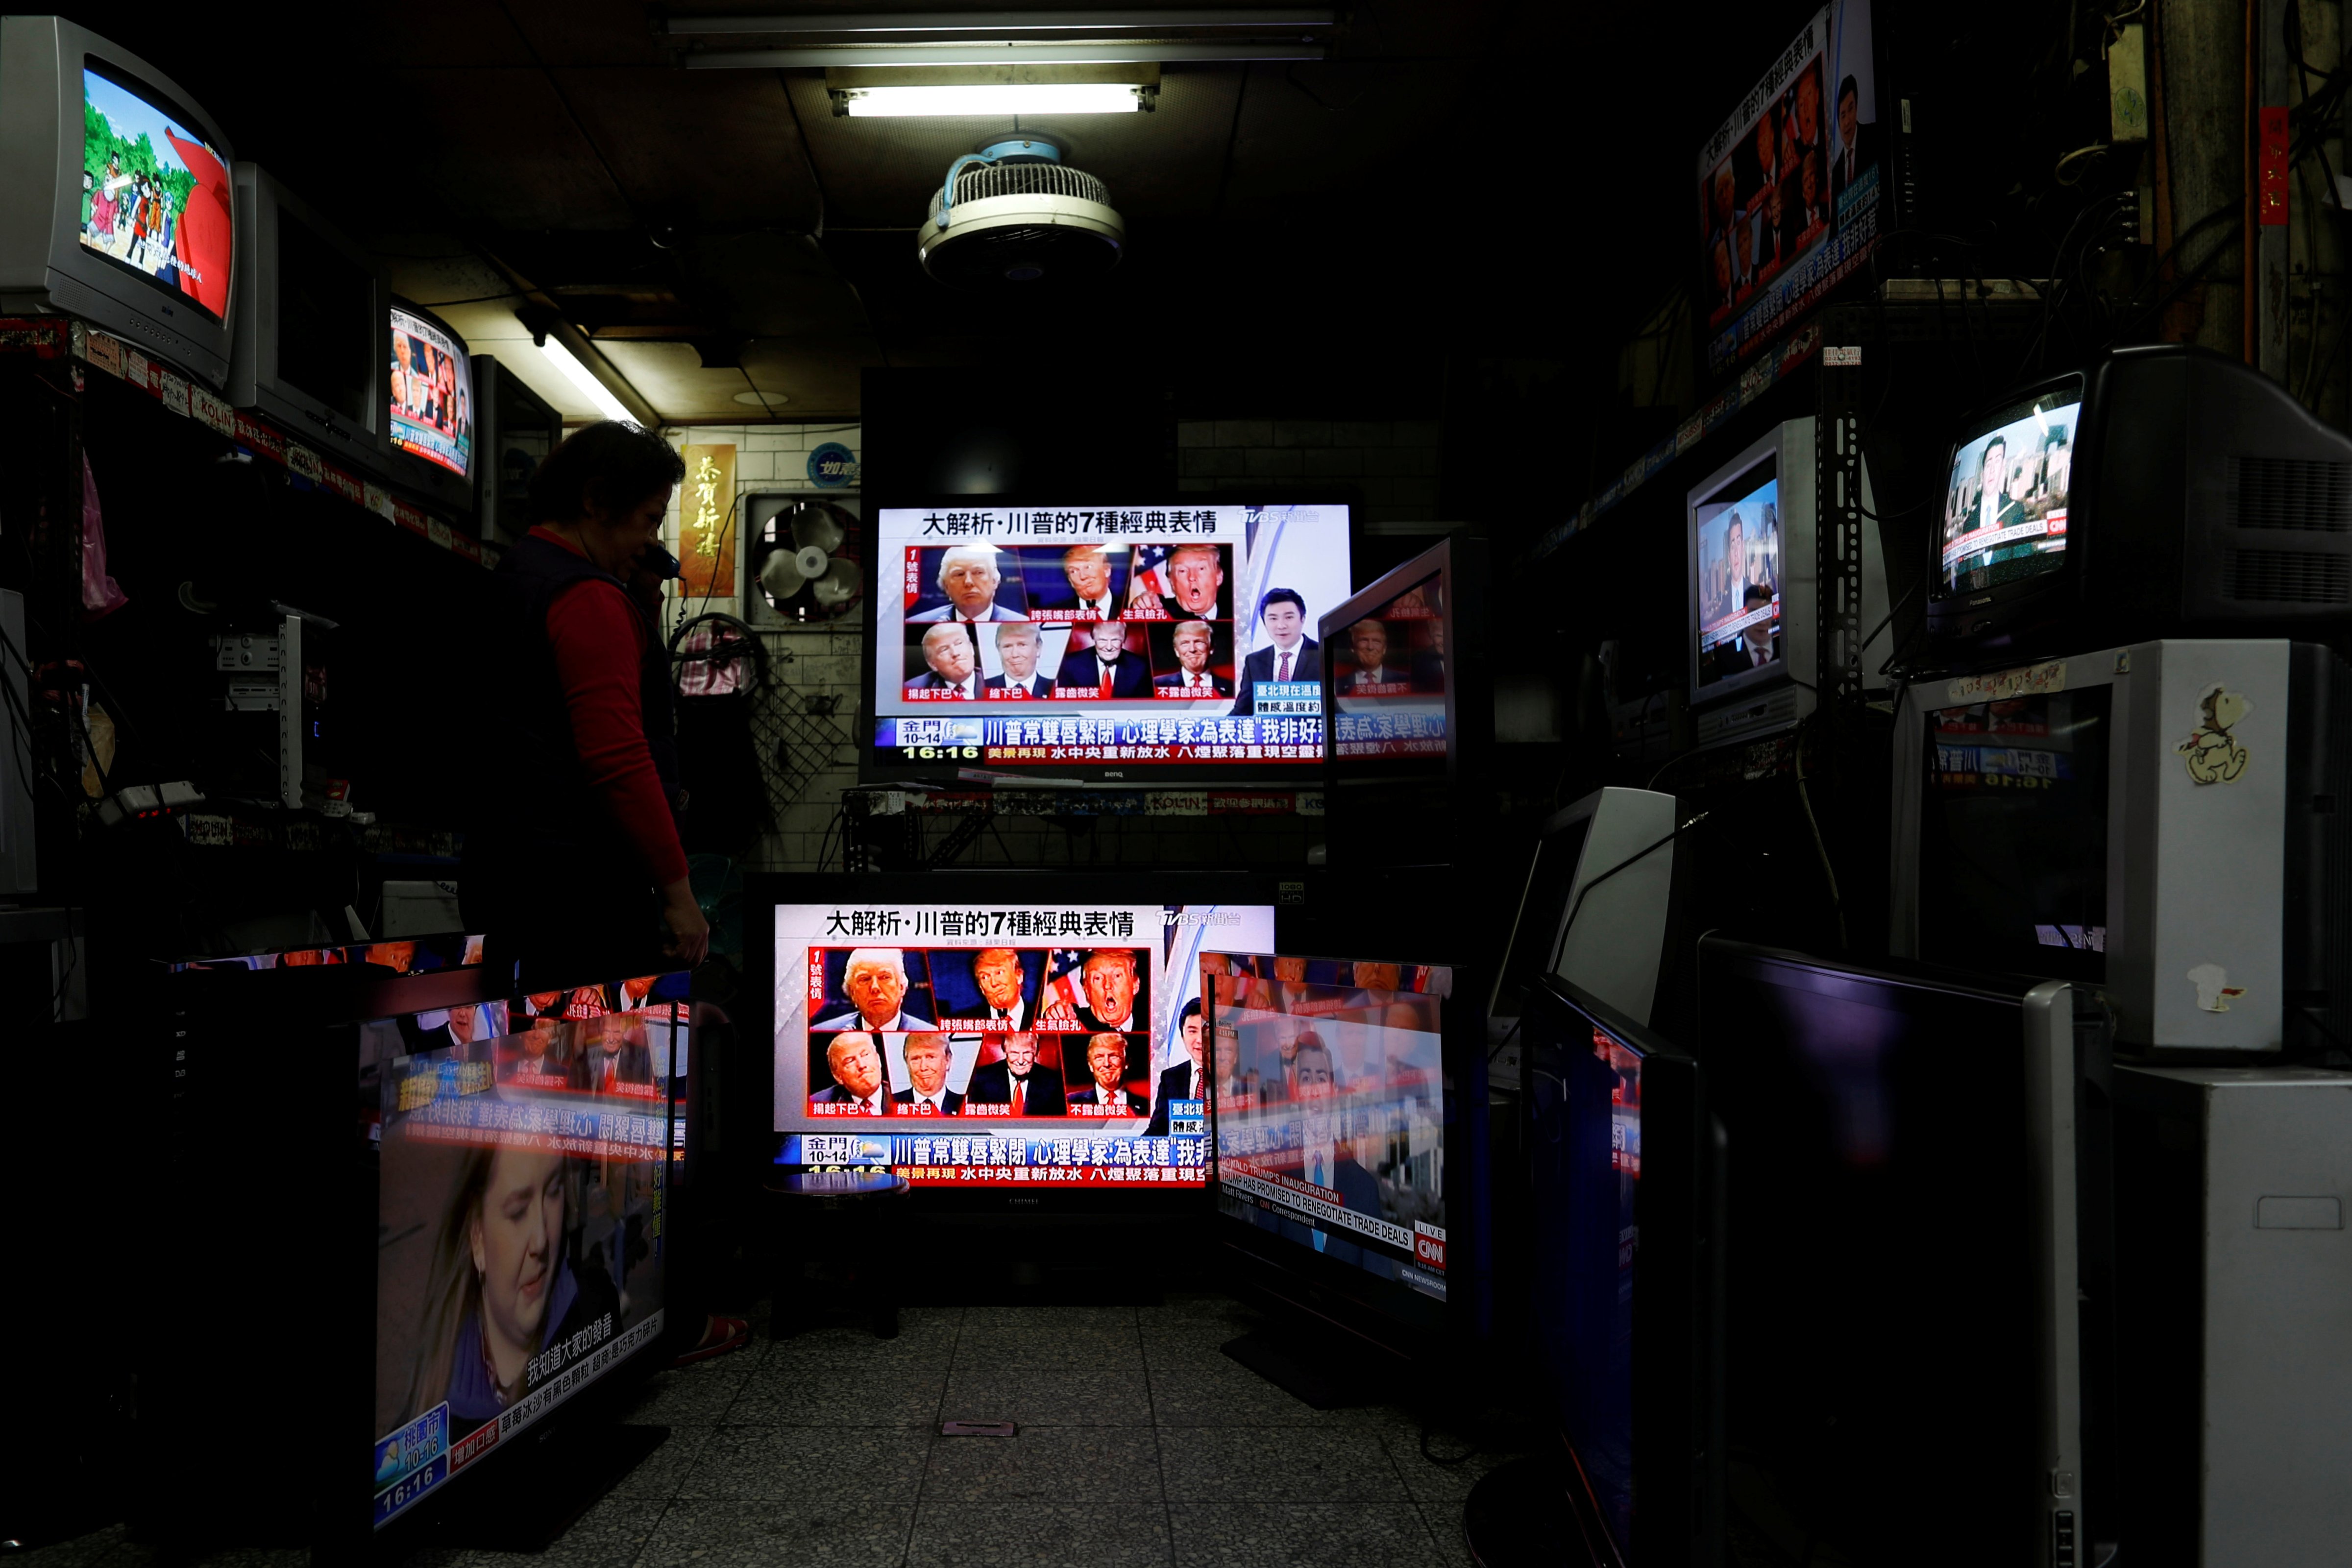 Images of U.S. President Donald Trump are seen on TV screens at a second hand shop in Taipei,Taiwan